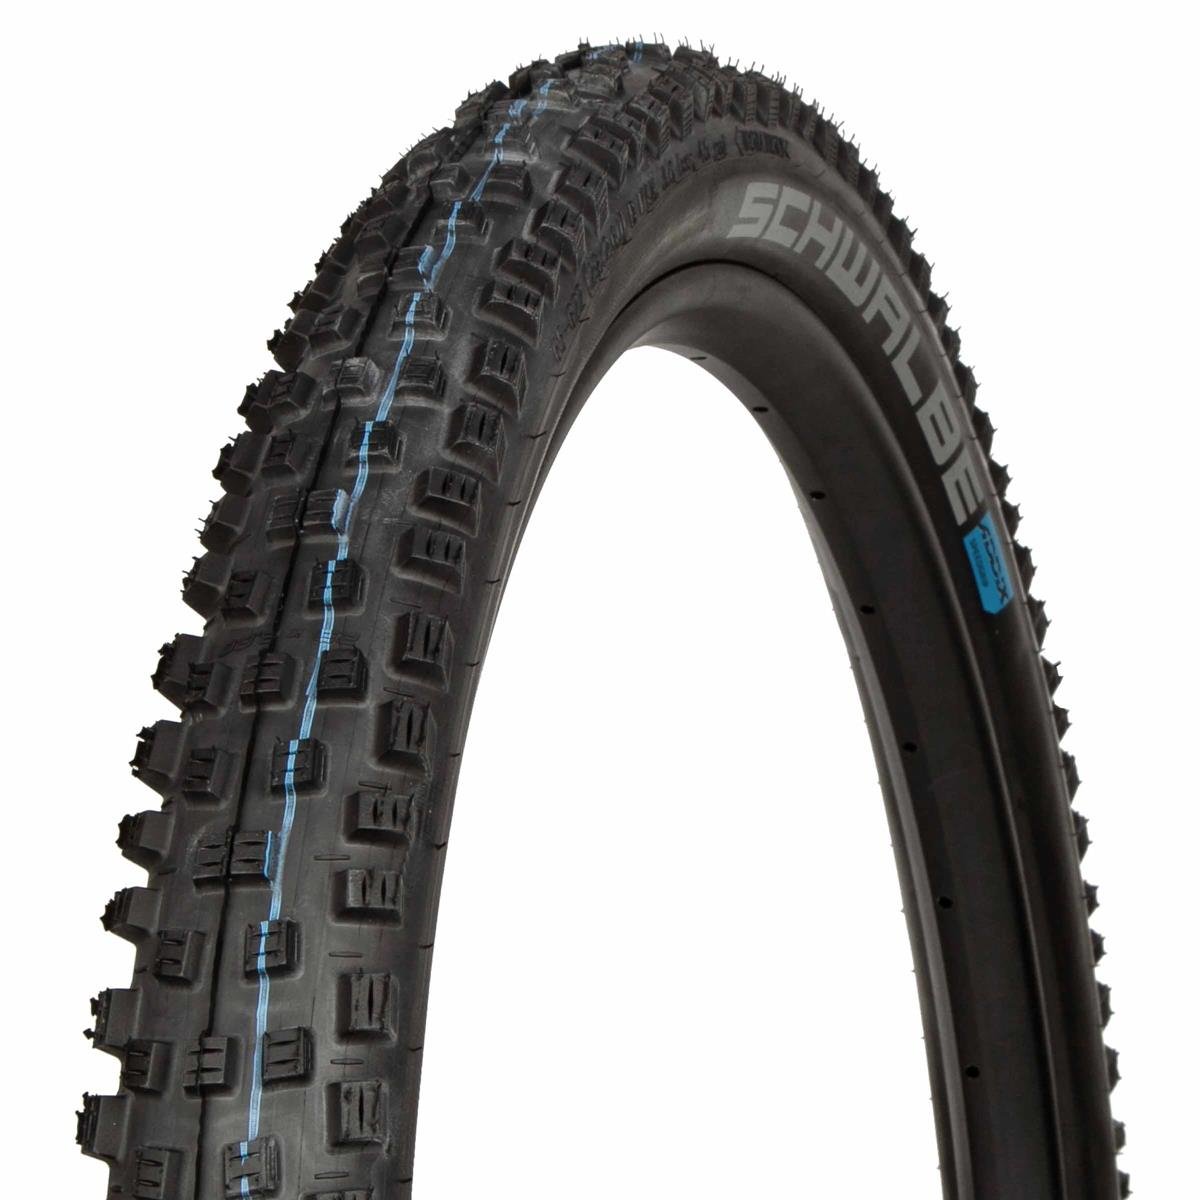 Schwalbe MTB Tire Eddy Current Front HS 496 Black, 29 x 2.4 Inches, Evo, Super Trail, SnakeSkin, Tubeless Easy, Addix Soft, Foldable